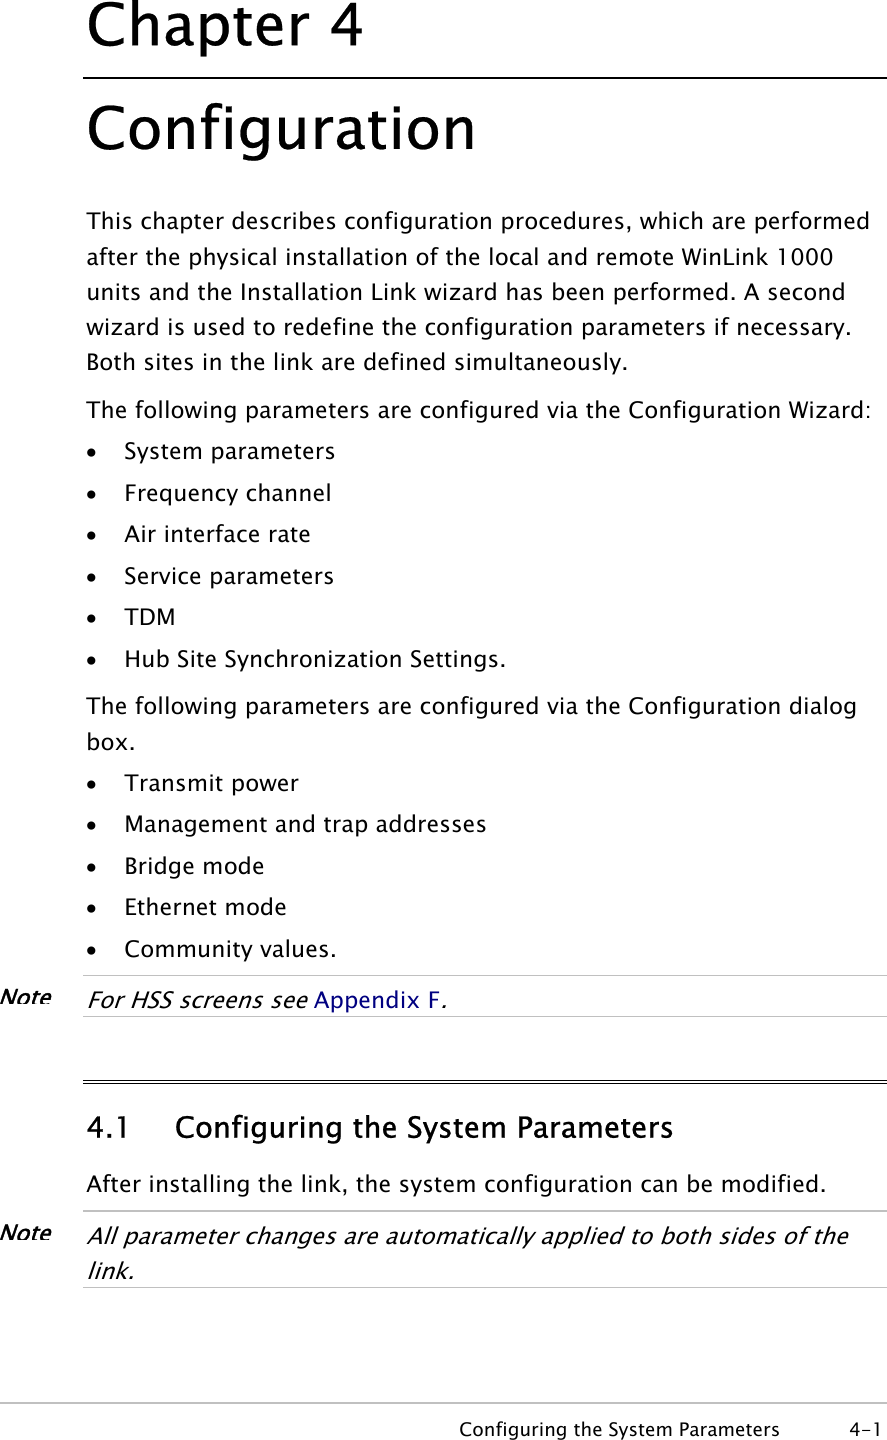 Chapter  4 Configuration This chapter describes configuration procedures, which are performed after the physical installation of the local and remote WinLink 1000 units and the Installation Link wizard has been performed. A second wizard is used to redefine the configuration parameters if necessary. Both sites in the link are defined simultaneously.   The following parameters are configured via the Configuration Wizard: • System parameters • Frequency channel • Air interface rate • Service parameters • TDM • Hub Site Synchronization Settings. The following parameters are configured via the Configuration dialog box. • Transmit power • Management and trap addresses • Bridge mode • Ethernet mode • Community values.  NoteFor HSS screens see Appendix F.  4.1 Configuring the System Parameters After installing the link, the system configuration can be modified.  NoteAll parameter changes are automatically applied to both sides of the link.    Configuring the System Parameters  4-1 